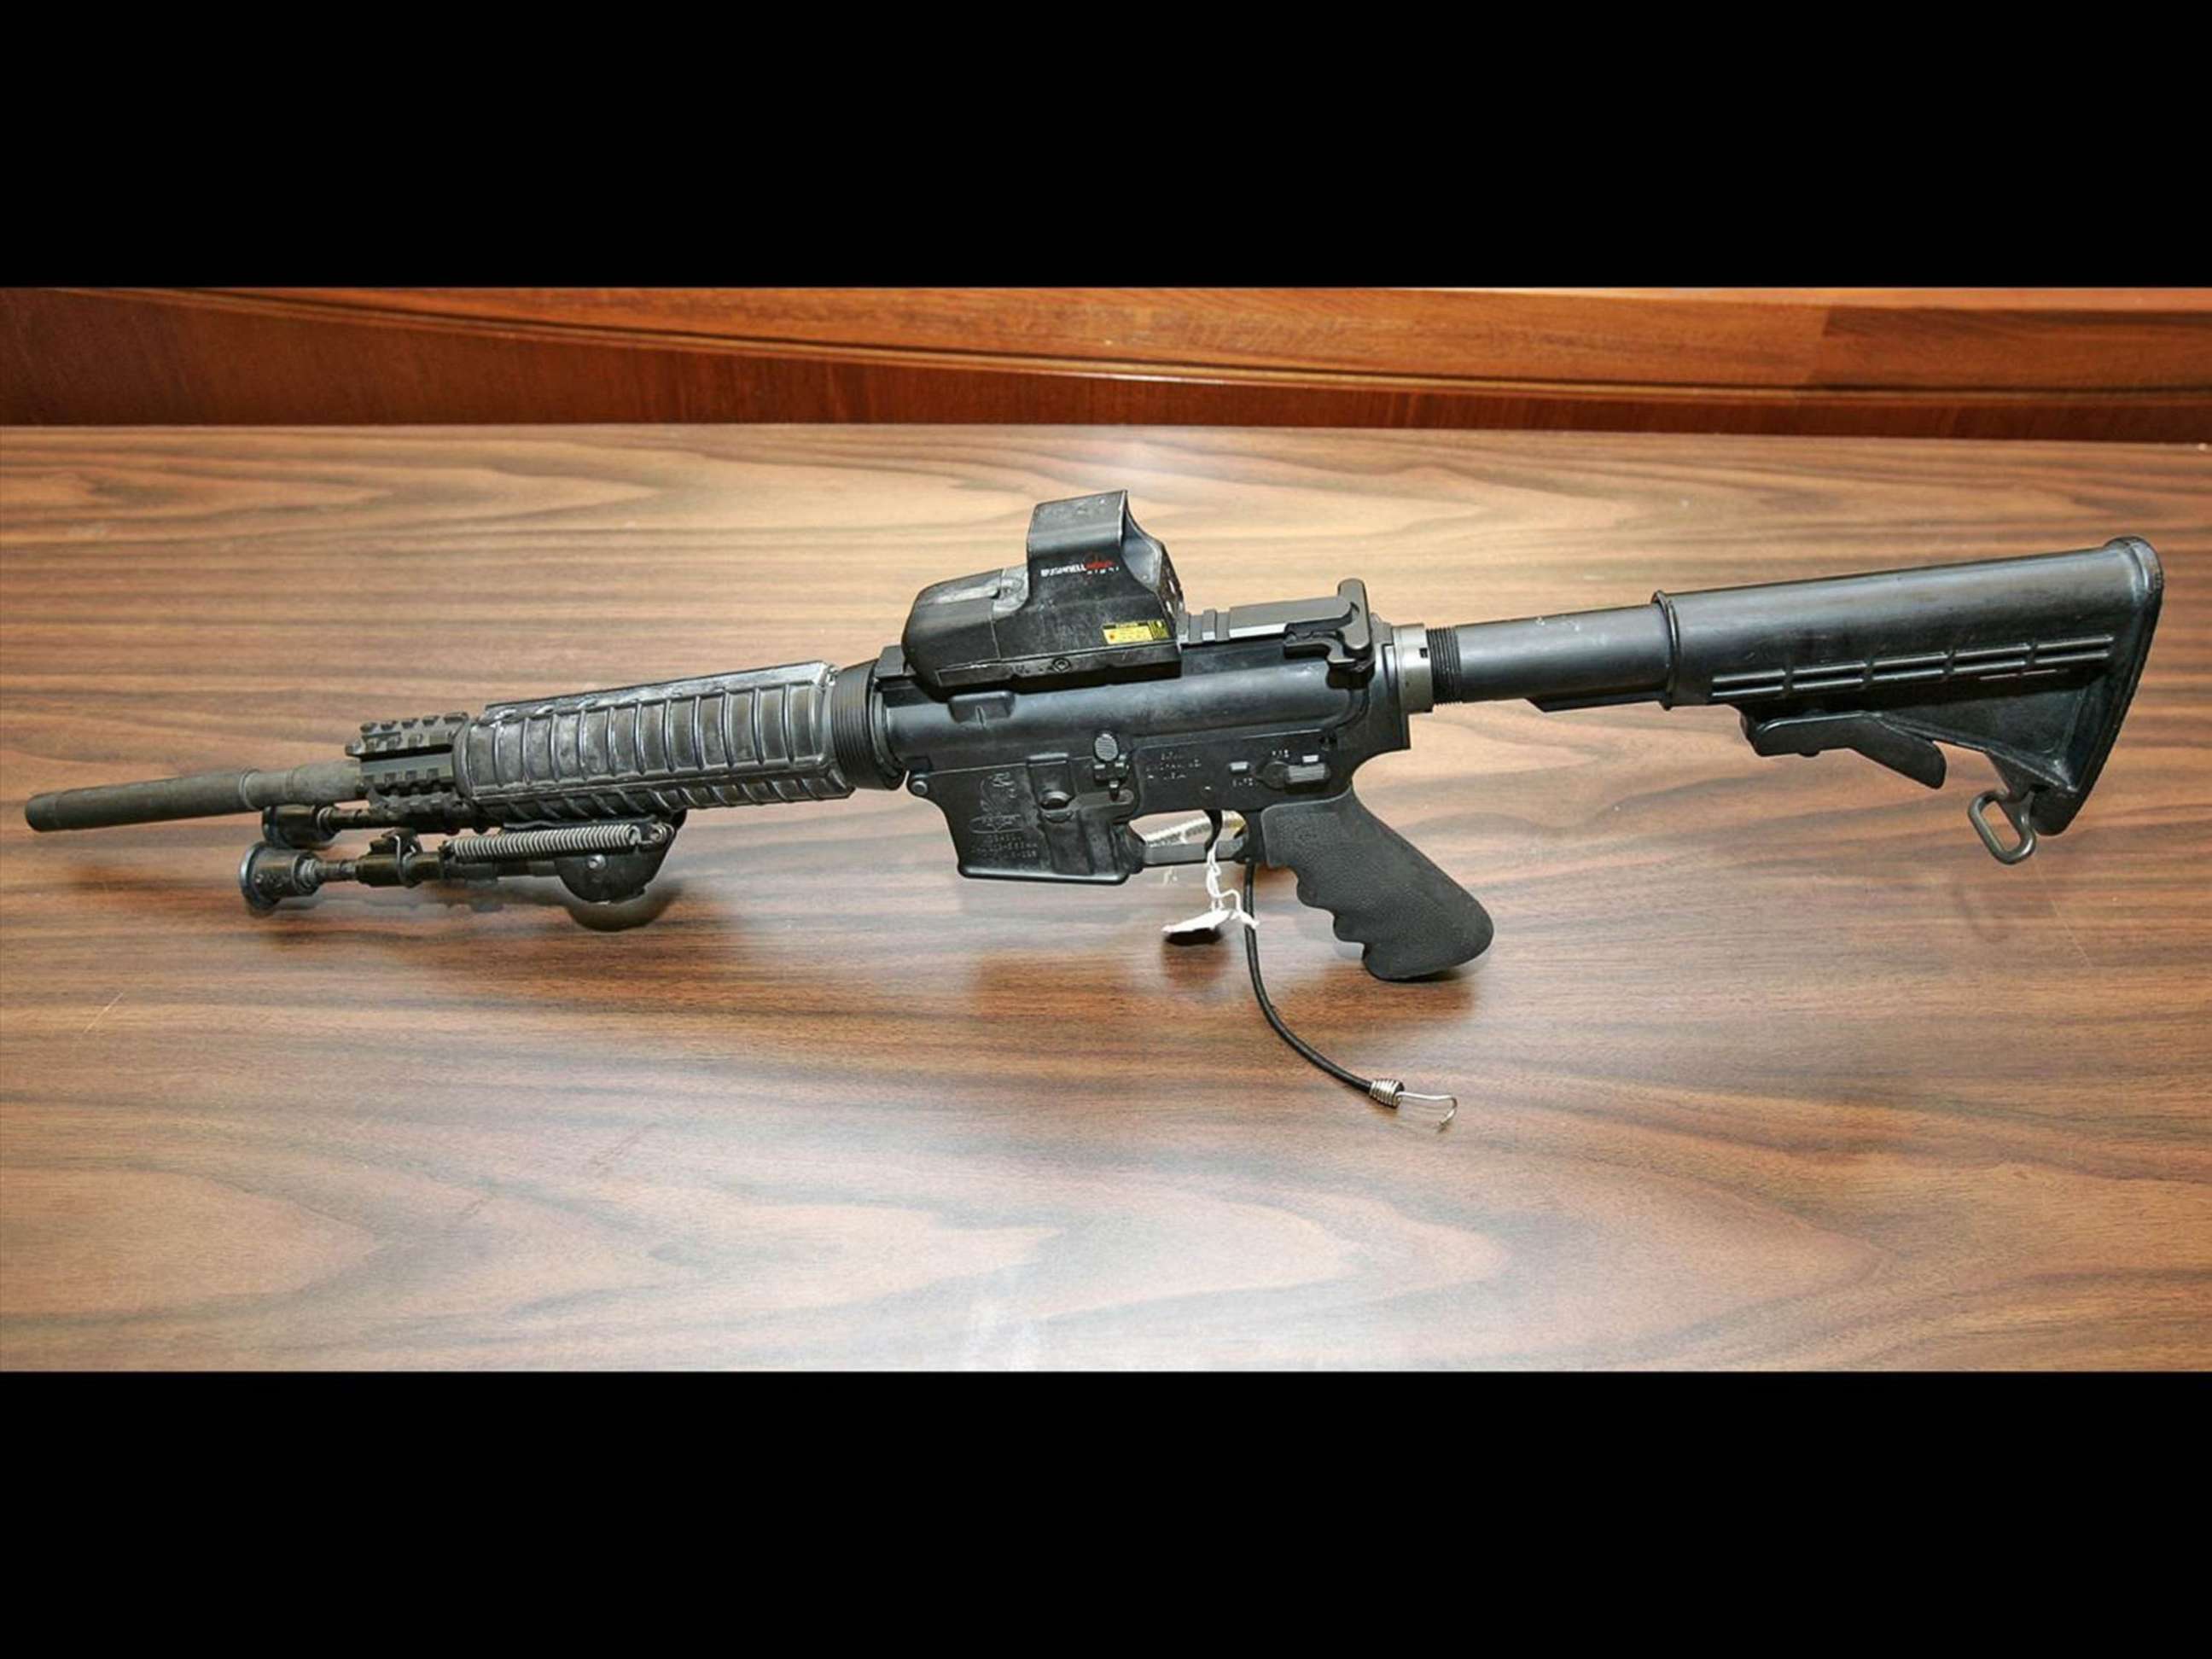 PHOTO: A court evidence photo shows Bushmaster rifle used by convicted sniper John Allen Muhammad and Lee Boyd Malvo in 2002 sniper shootings, in Chesapeake Beach, Va.